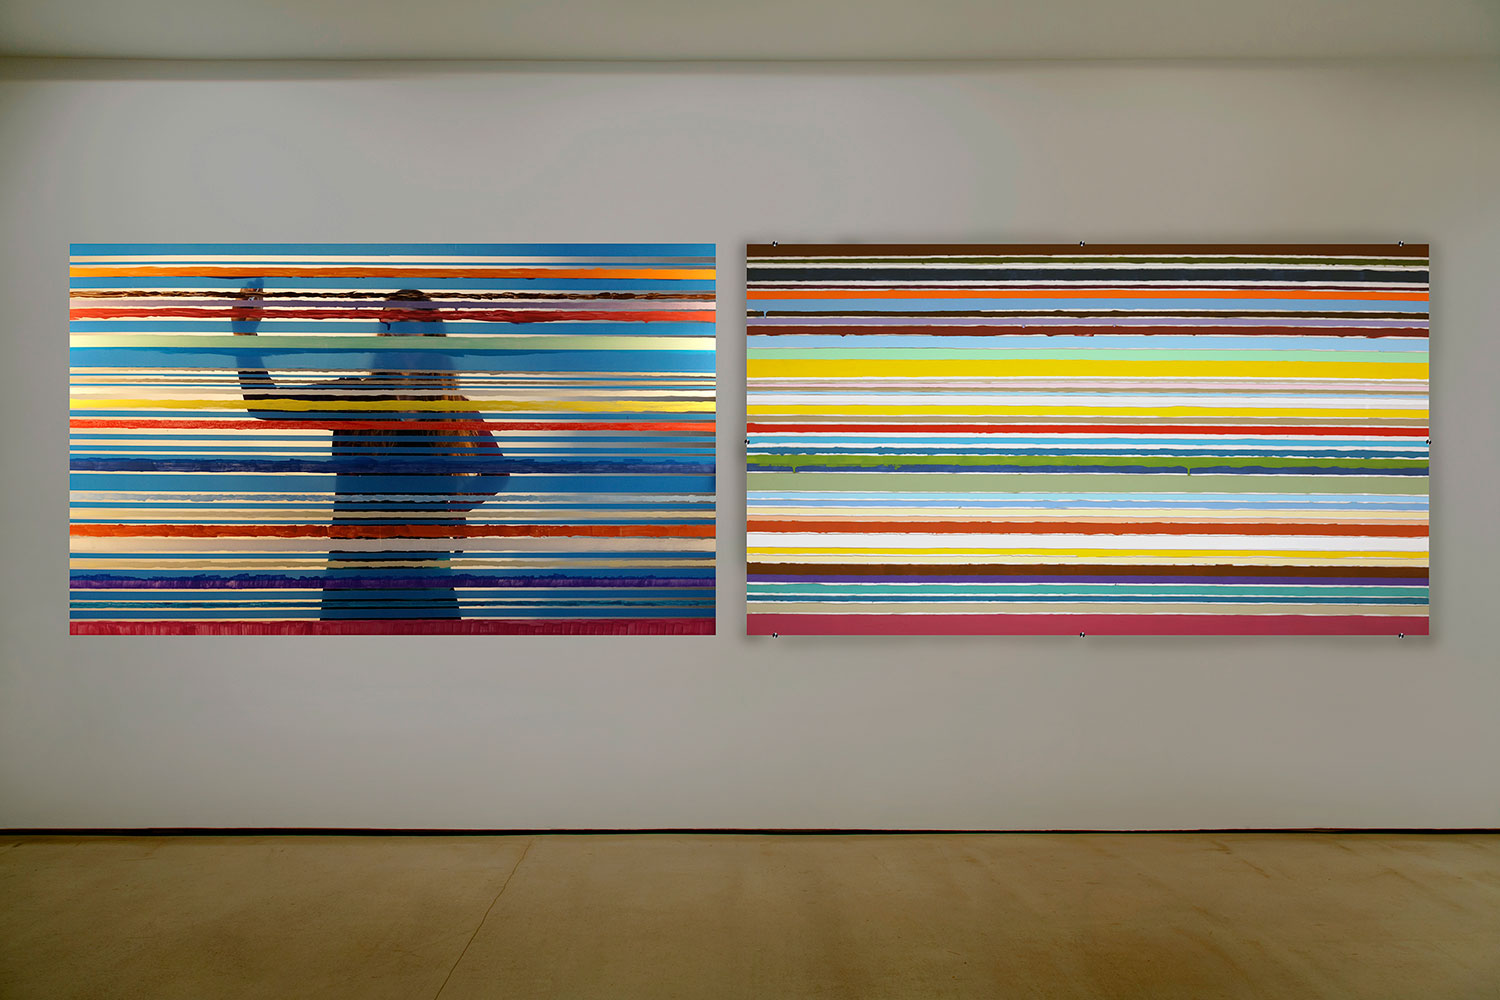 New Day, 2020, installation view, video, acrylic on acrylic, 66 x 38.5<br><br>Kenneth Noland's painting transforms into a social experience. Viewers apply the 41 color stripes onto the off white background.